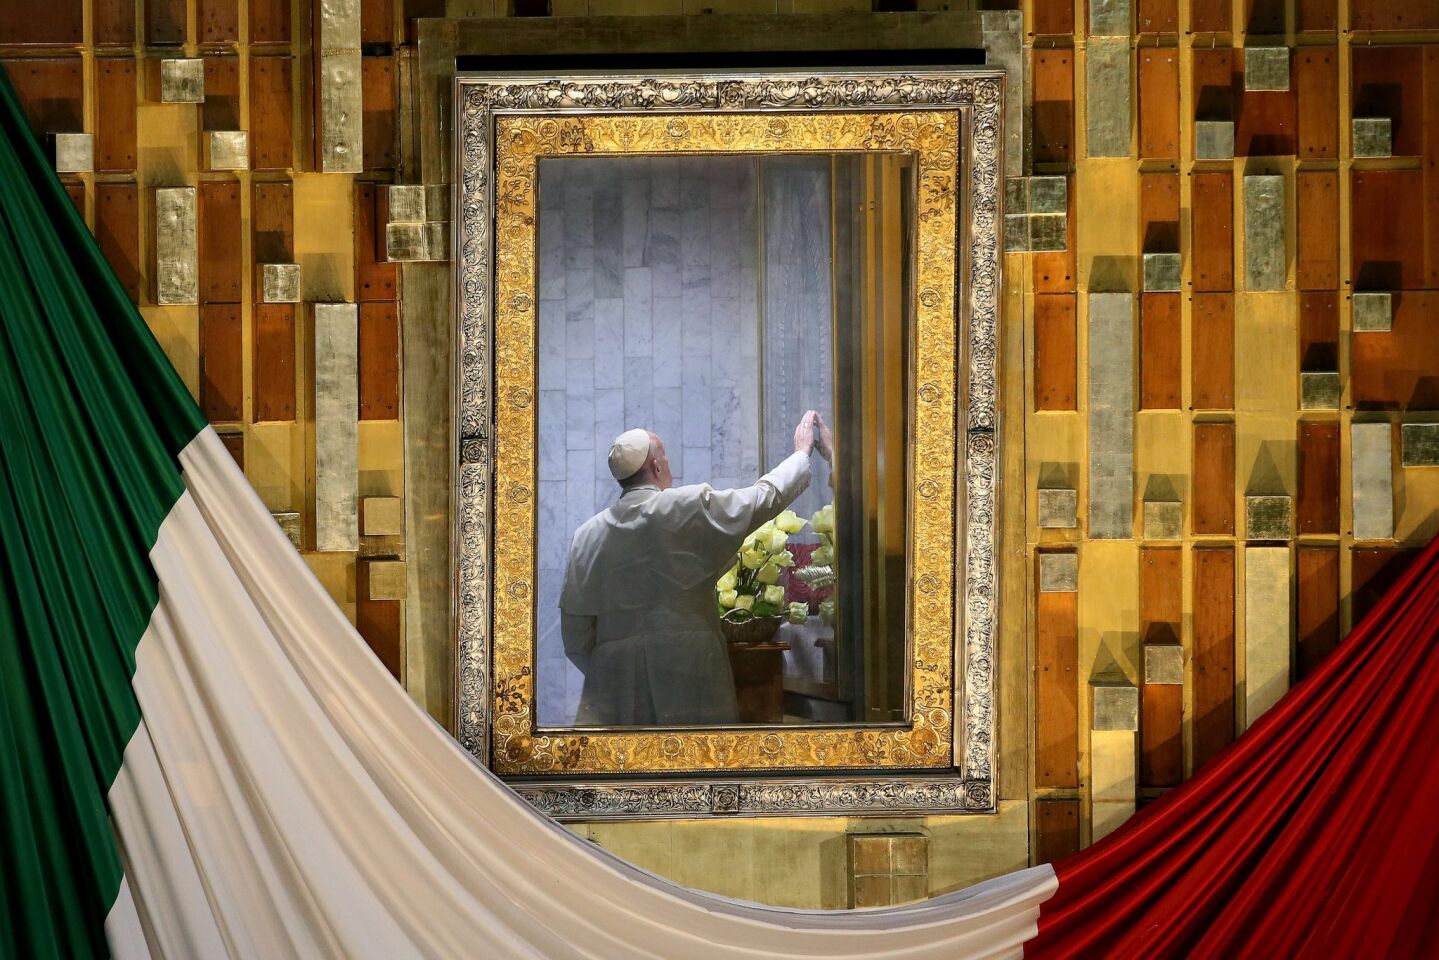 Pope Francis in a room behind the altar to pray before the image of Our Lady of Guadalupe while celebrating Mass at the Basilica of Our Lady of Guadalupe in Mexico City.